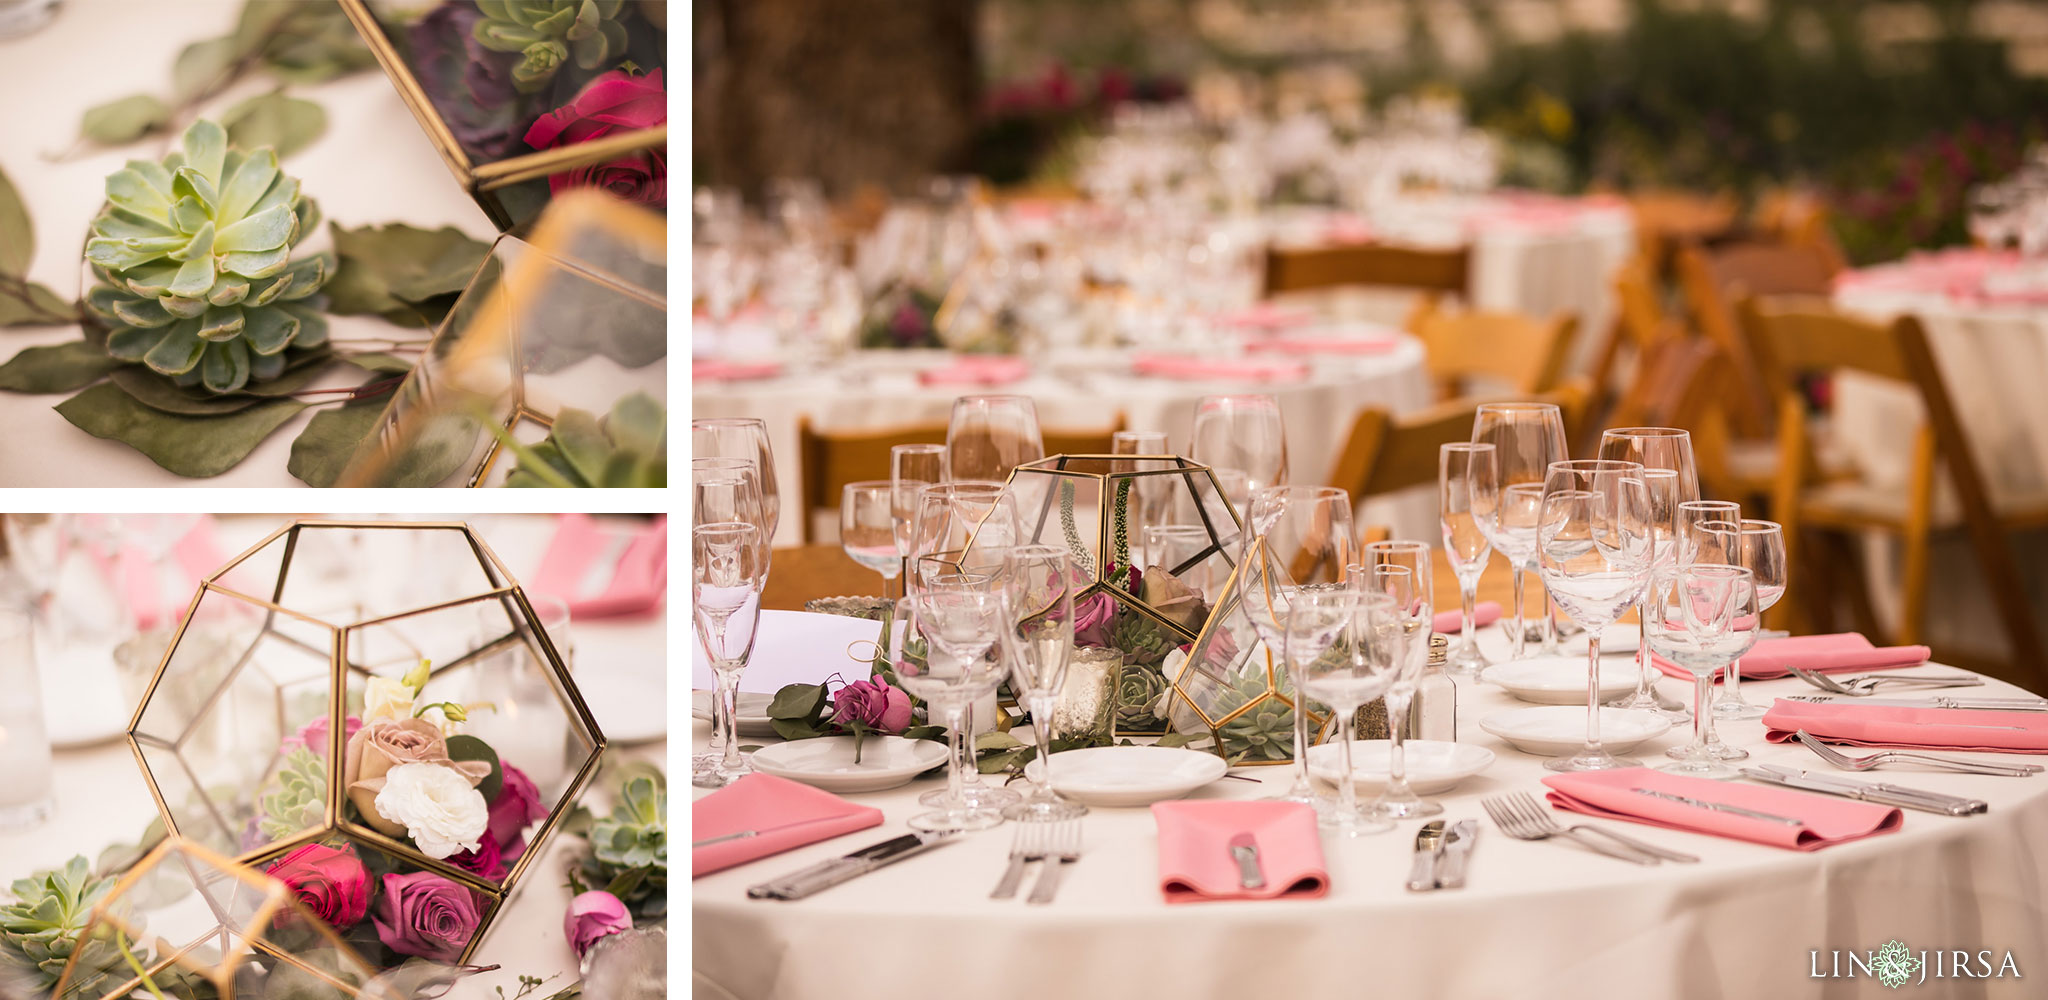 25 odonnell house palm springs wedding reception photography